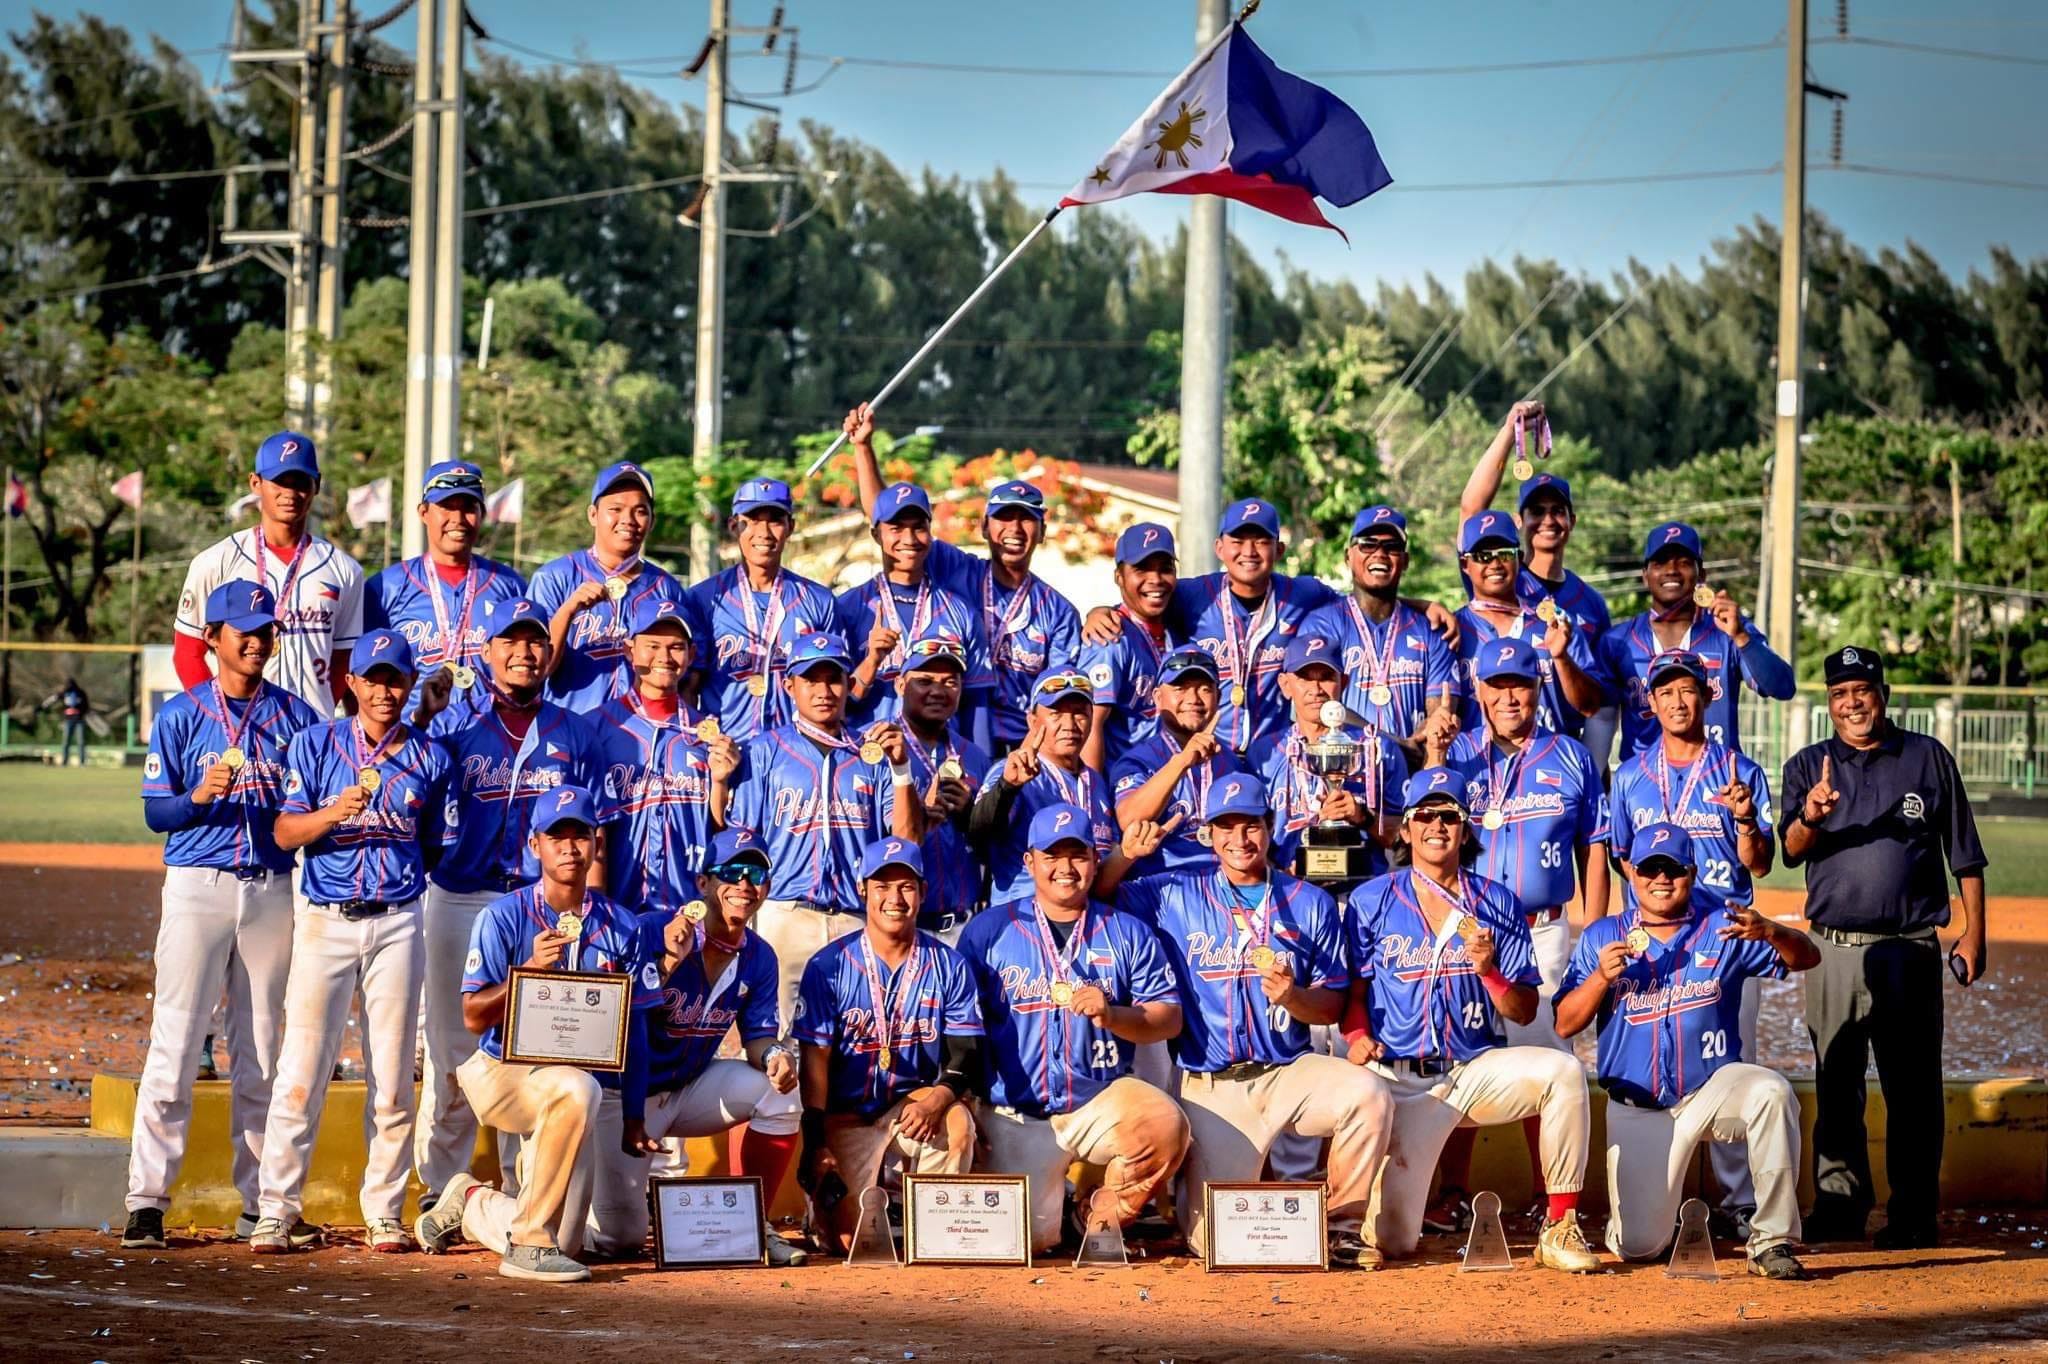 The Philippine National Baseball Team will be competing in the 2023 Asian Games